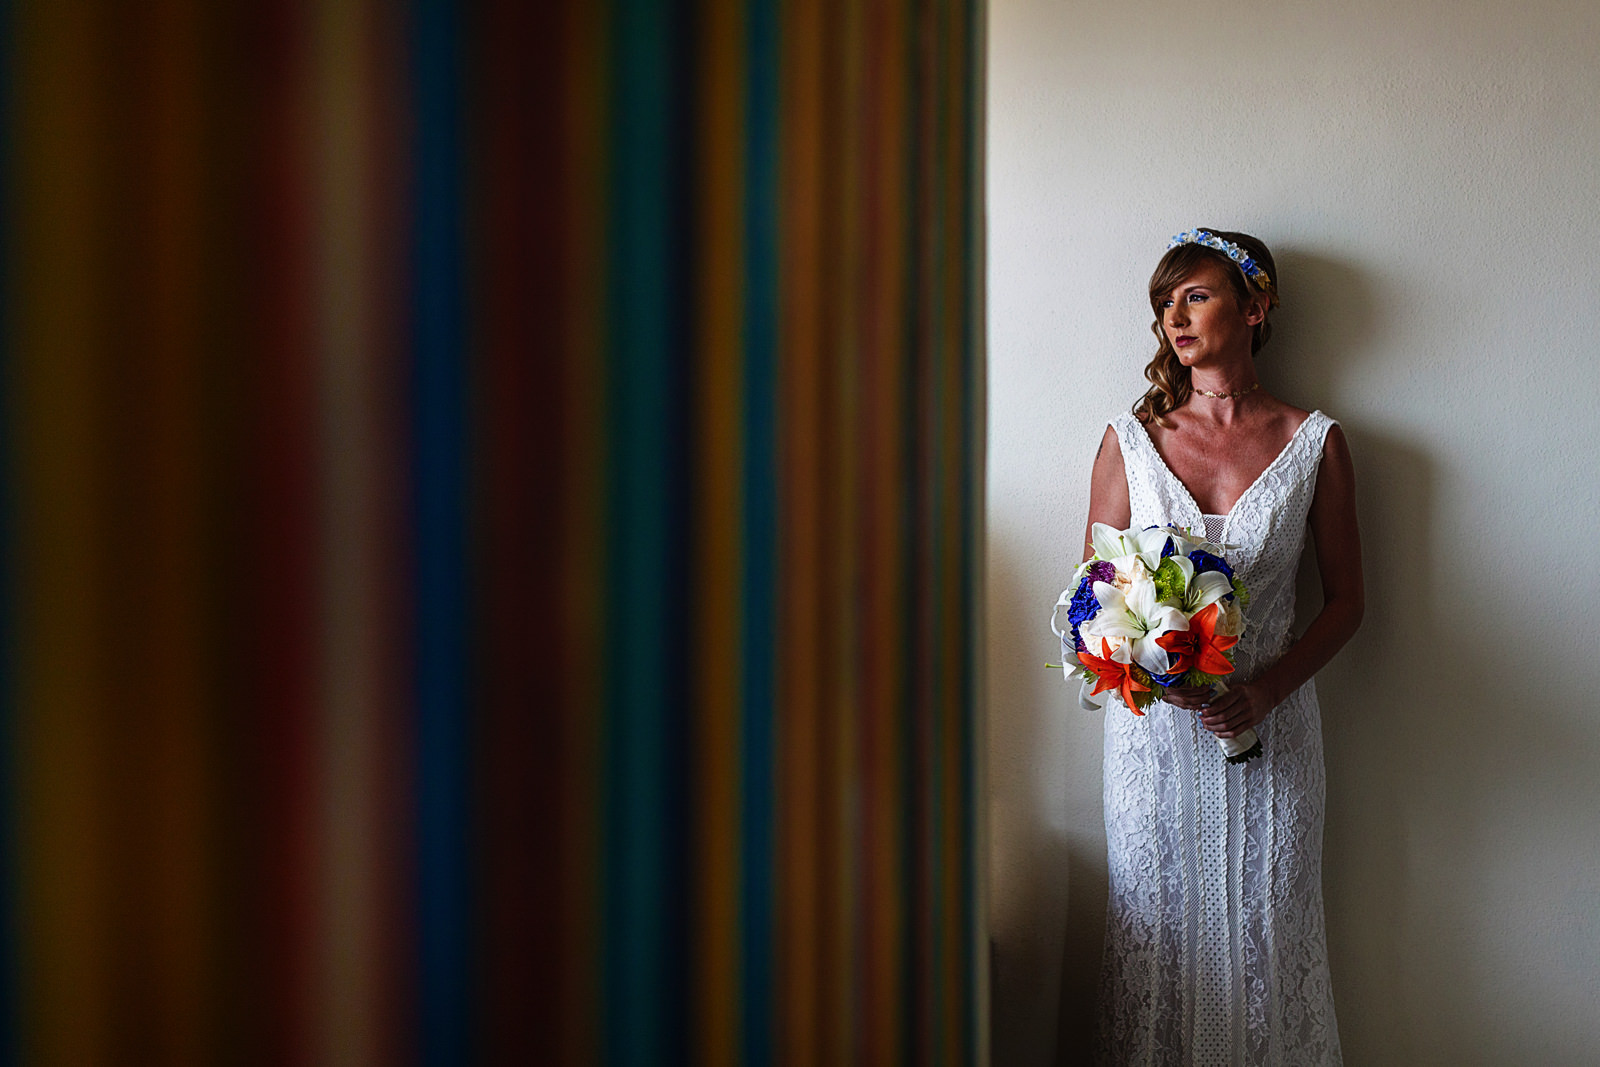 Colorful portrait of the bride light up by the window